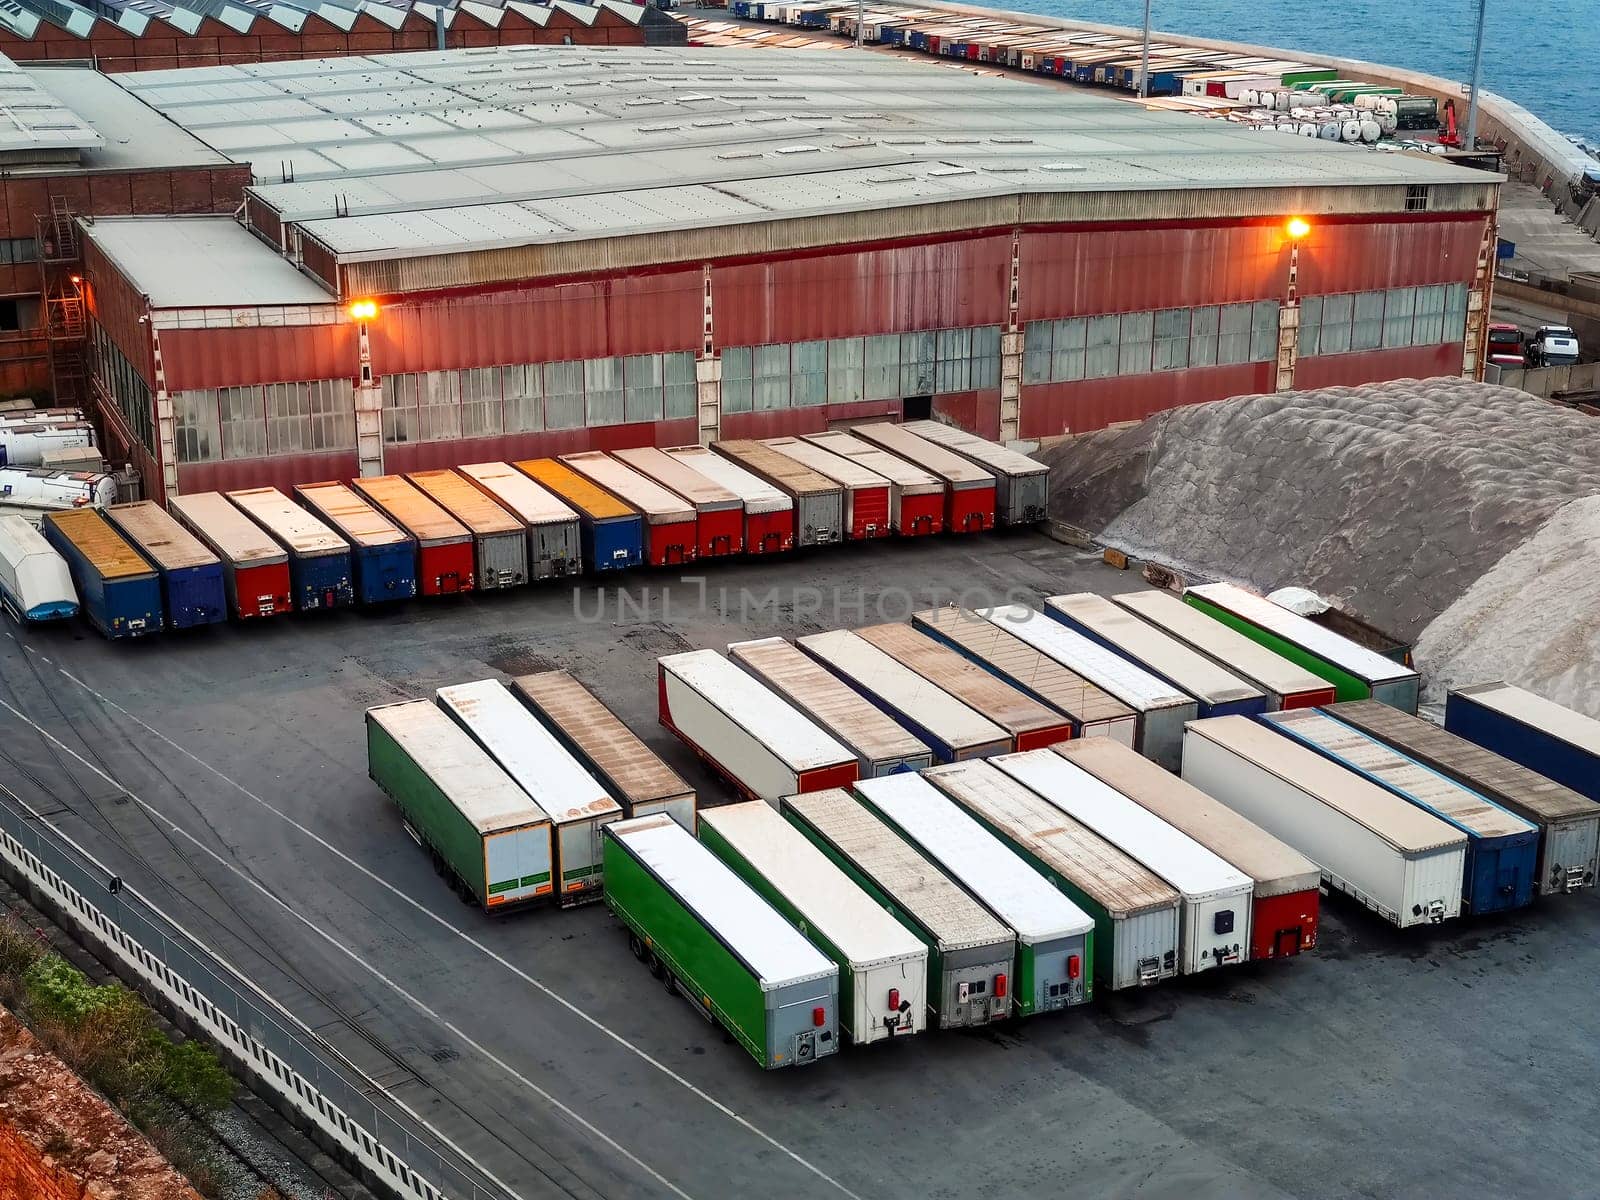 Commercial port with parked cargo prepared for the worldwide transportation of raw commodities, logistics, and global industry